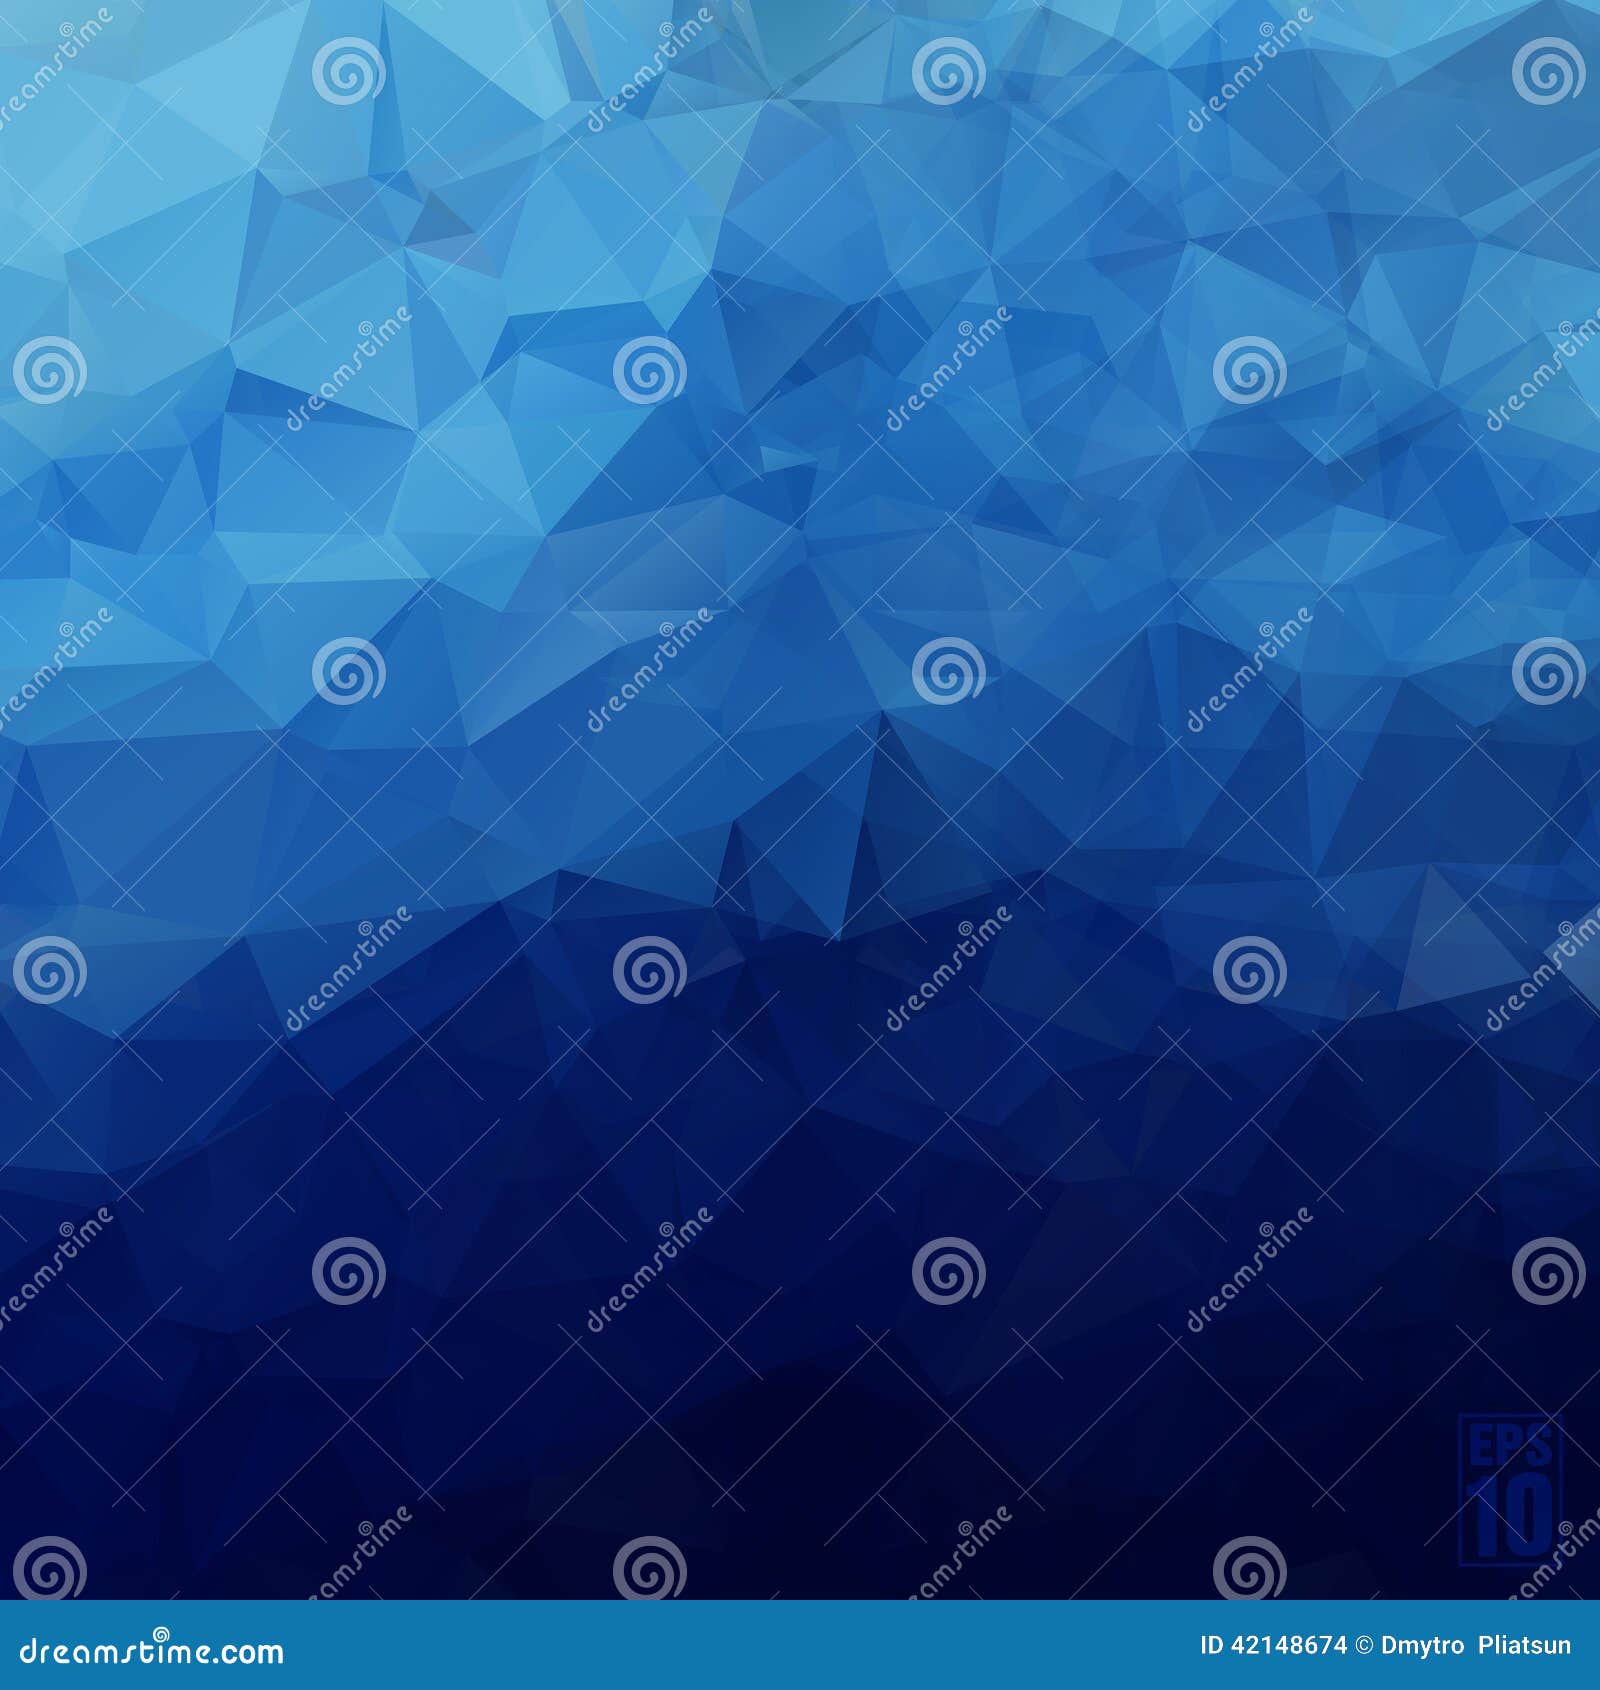 abstract geometric background of triangles in blue